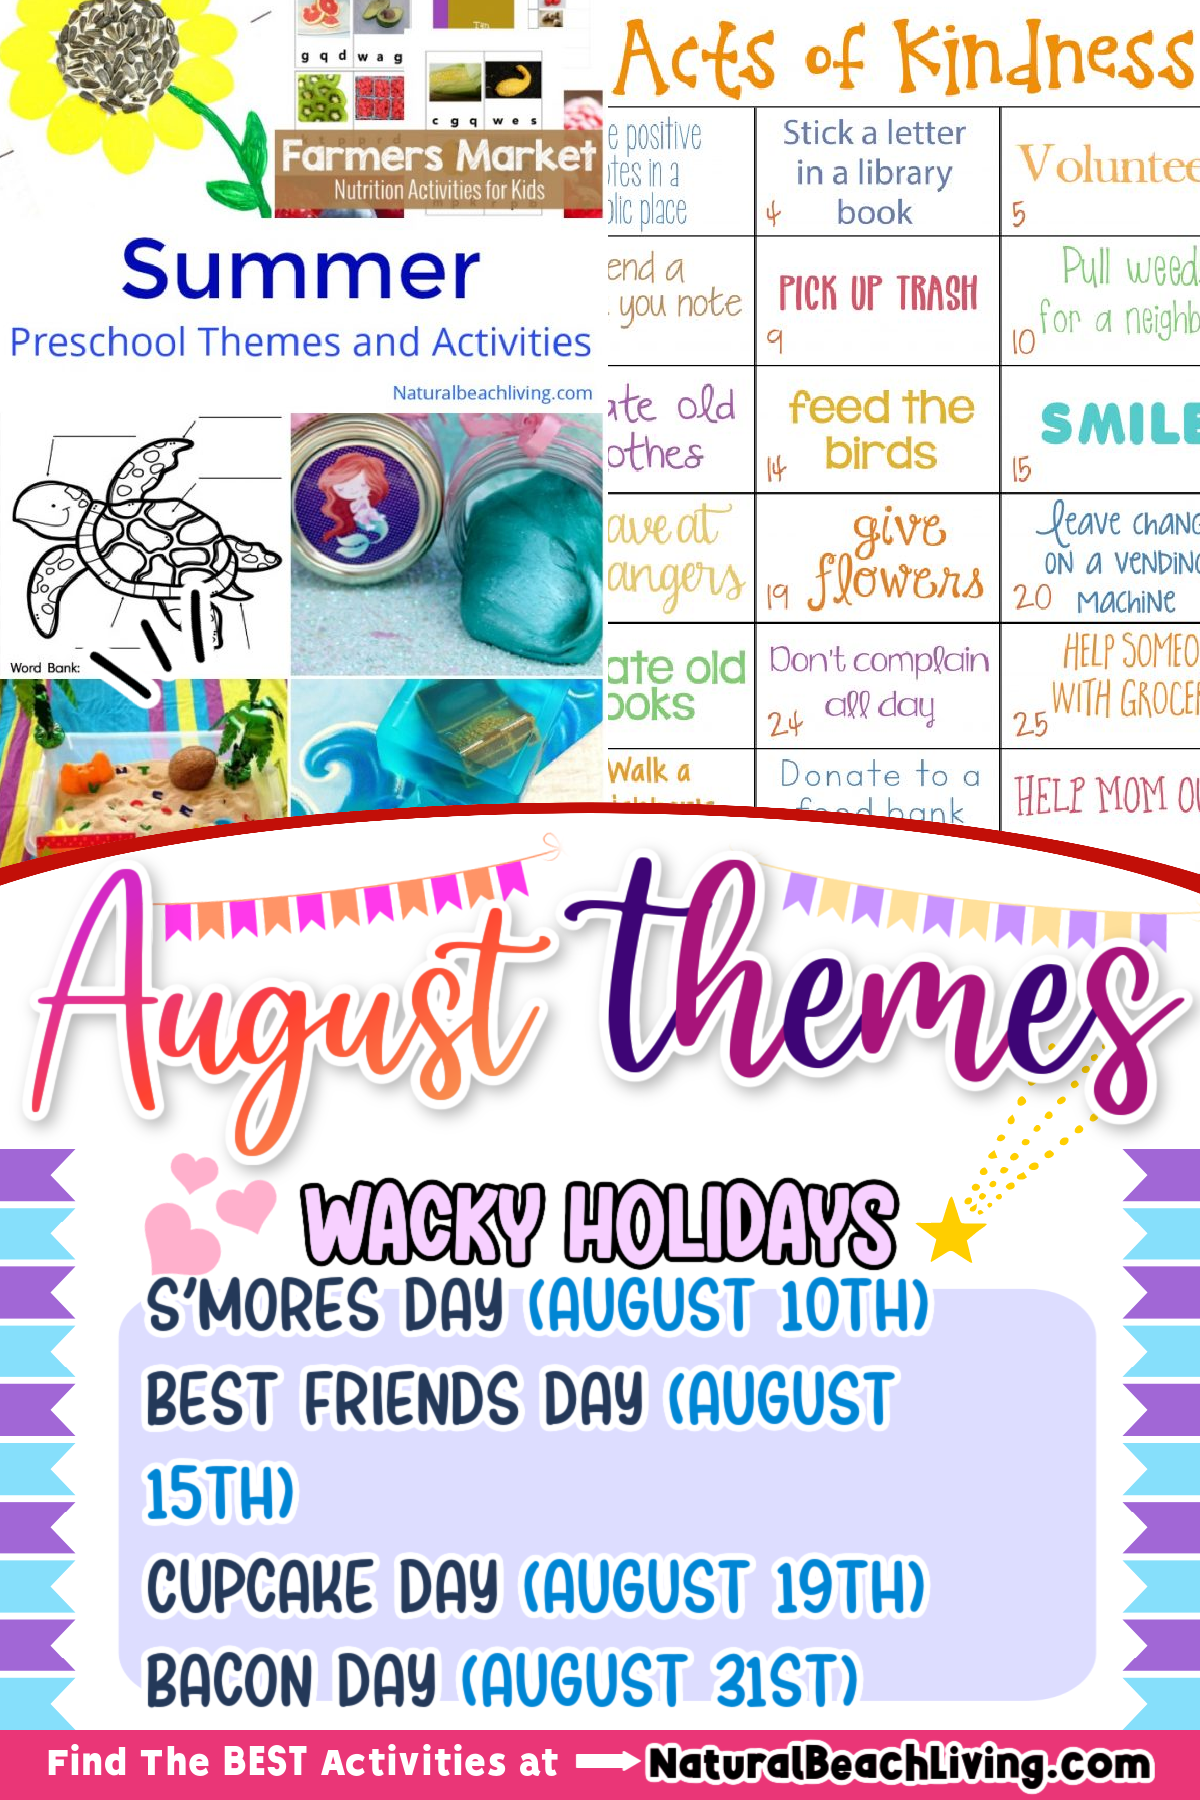 Find The Best August Themes for daily activities and ideas. You and Your child will have so many great summer activities and ideas to use their imagination and play with all month long; August themes for preschool, August Holidays, and August calendar themes are included, as well as August Ideas for End of Summer Celebrations.